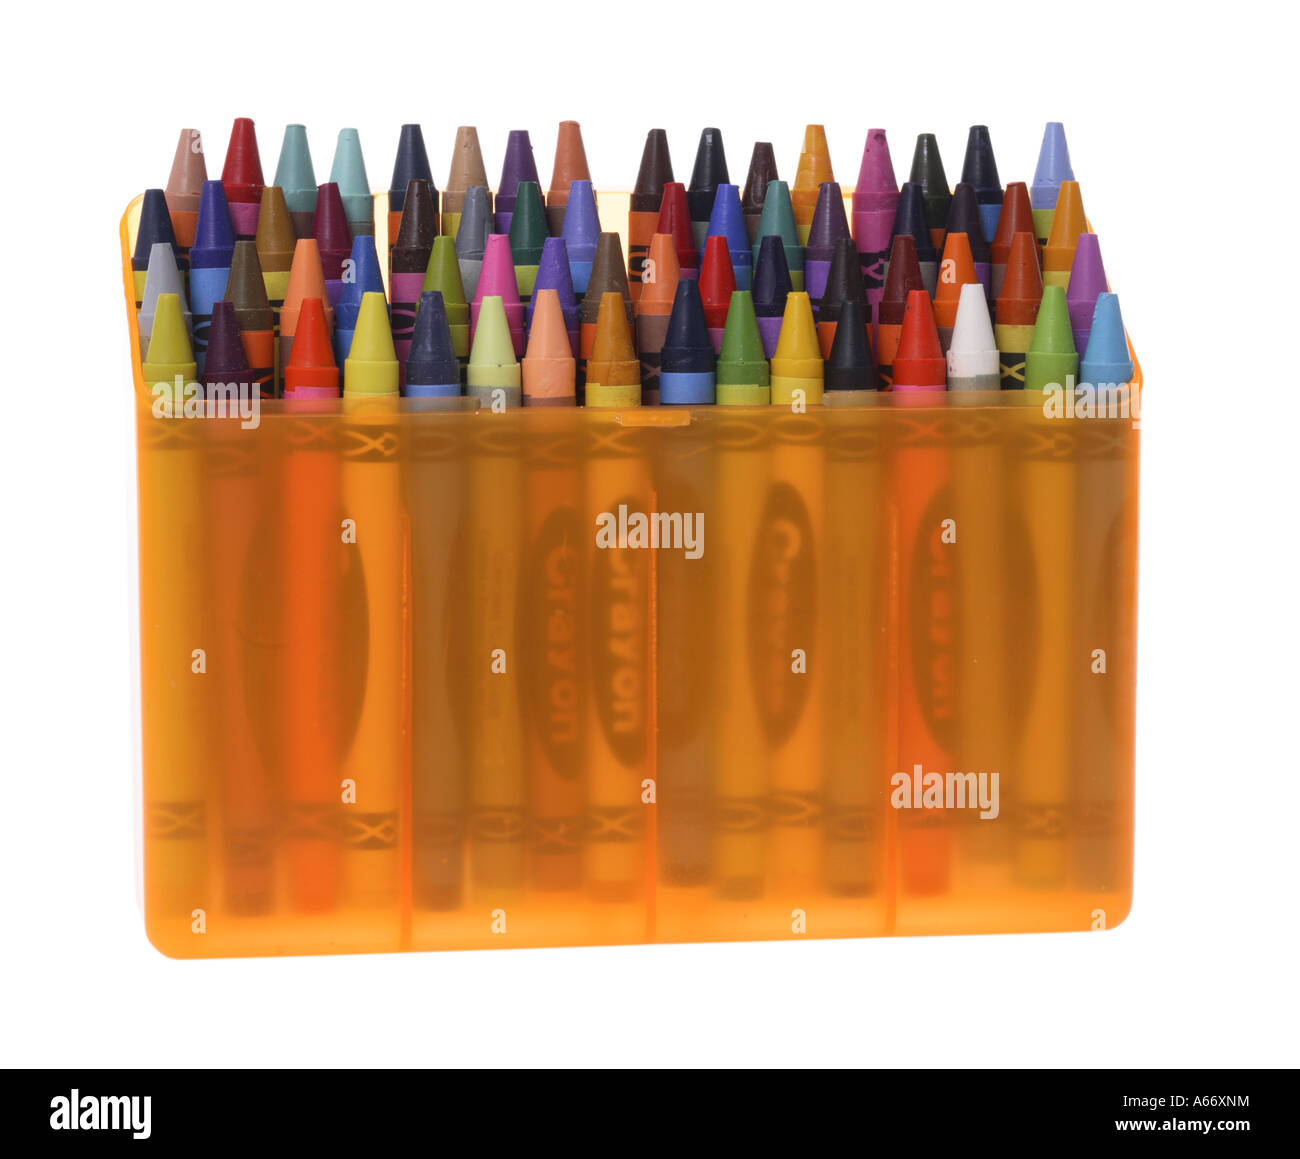 Box of crayons cut out on white background Stock Photo